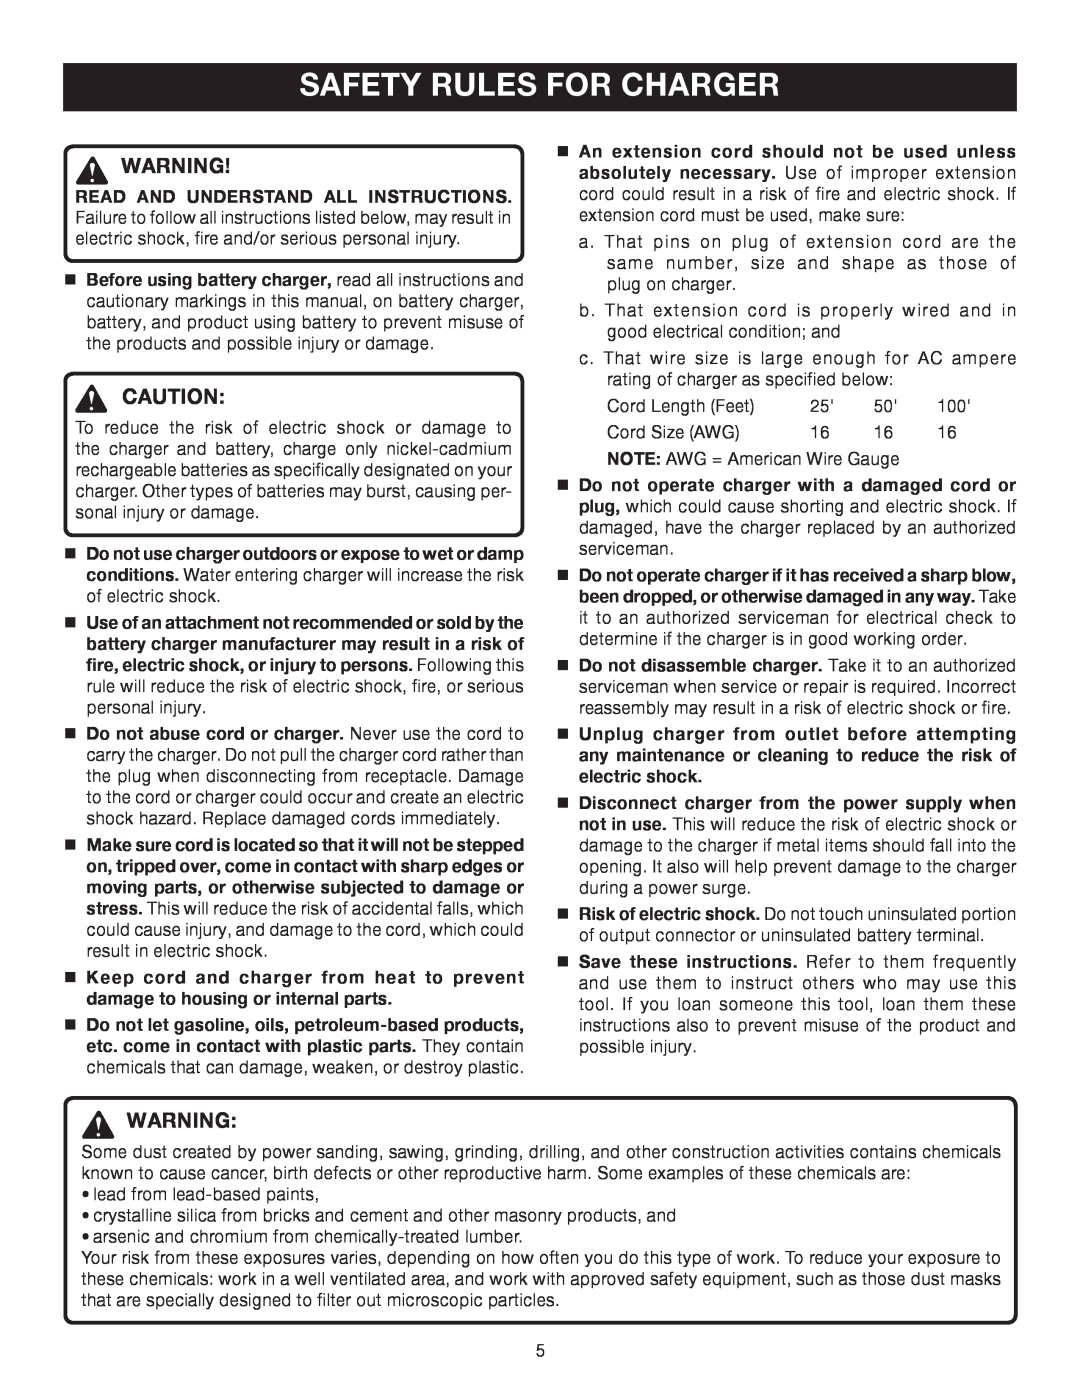 Ryobi P710 manual Safety Rules For Charger 